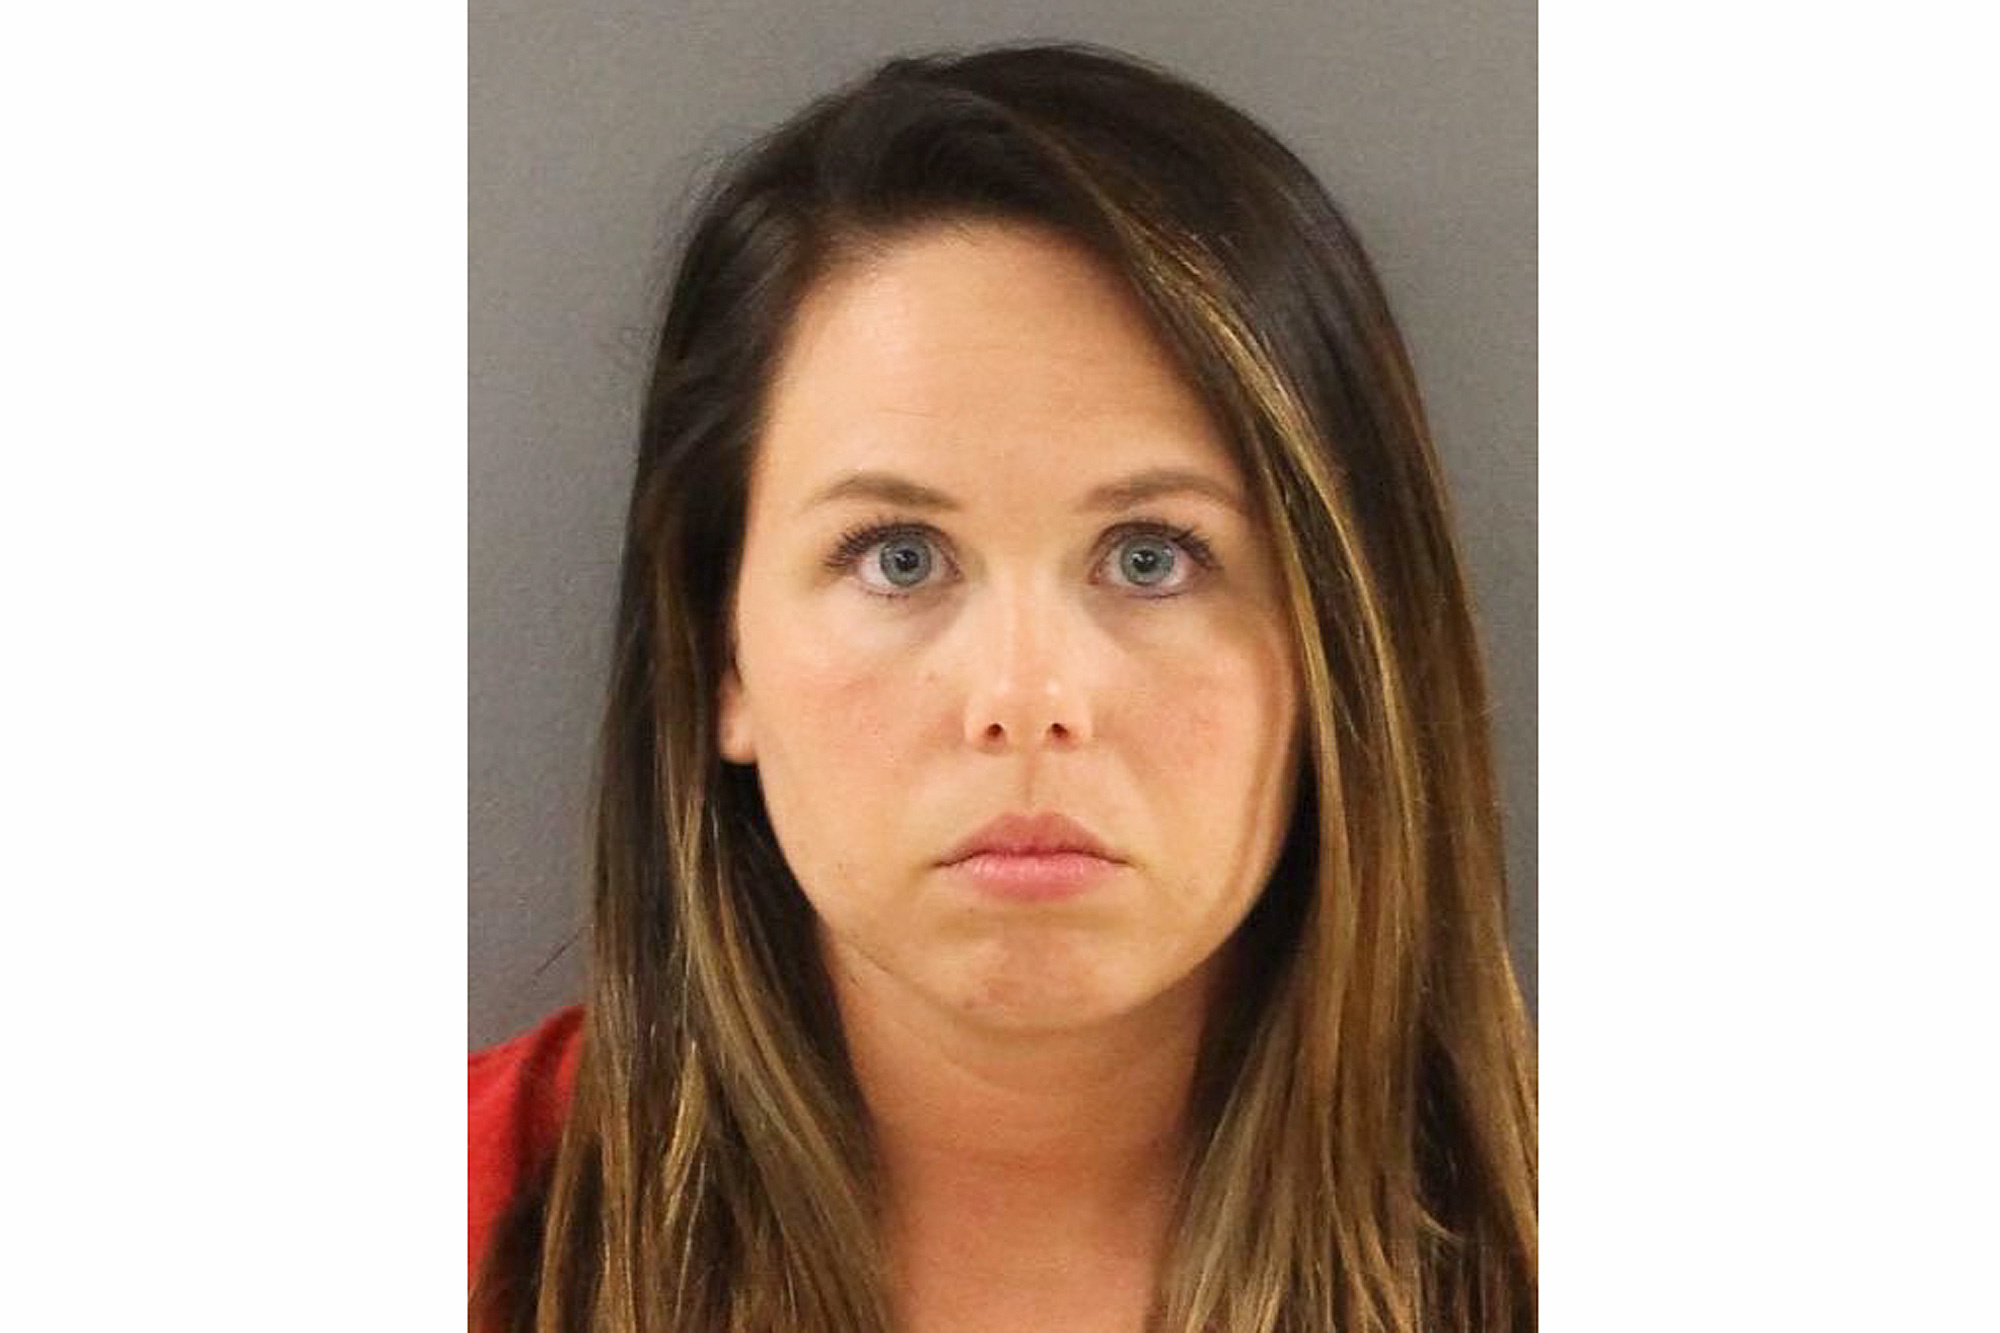 HS Football Coachs Wife Faces Prison After Being Caught Having Sex With One Of His Players